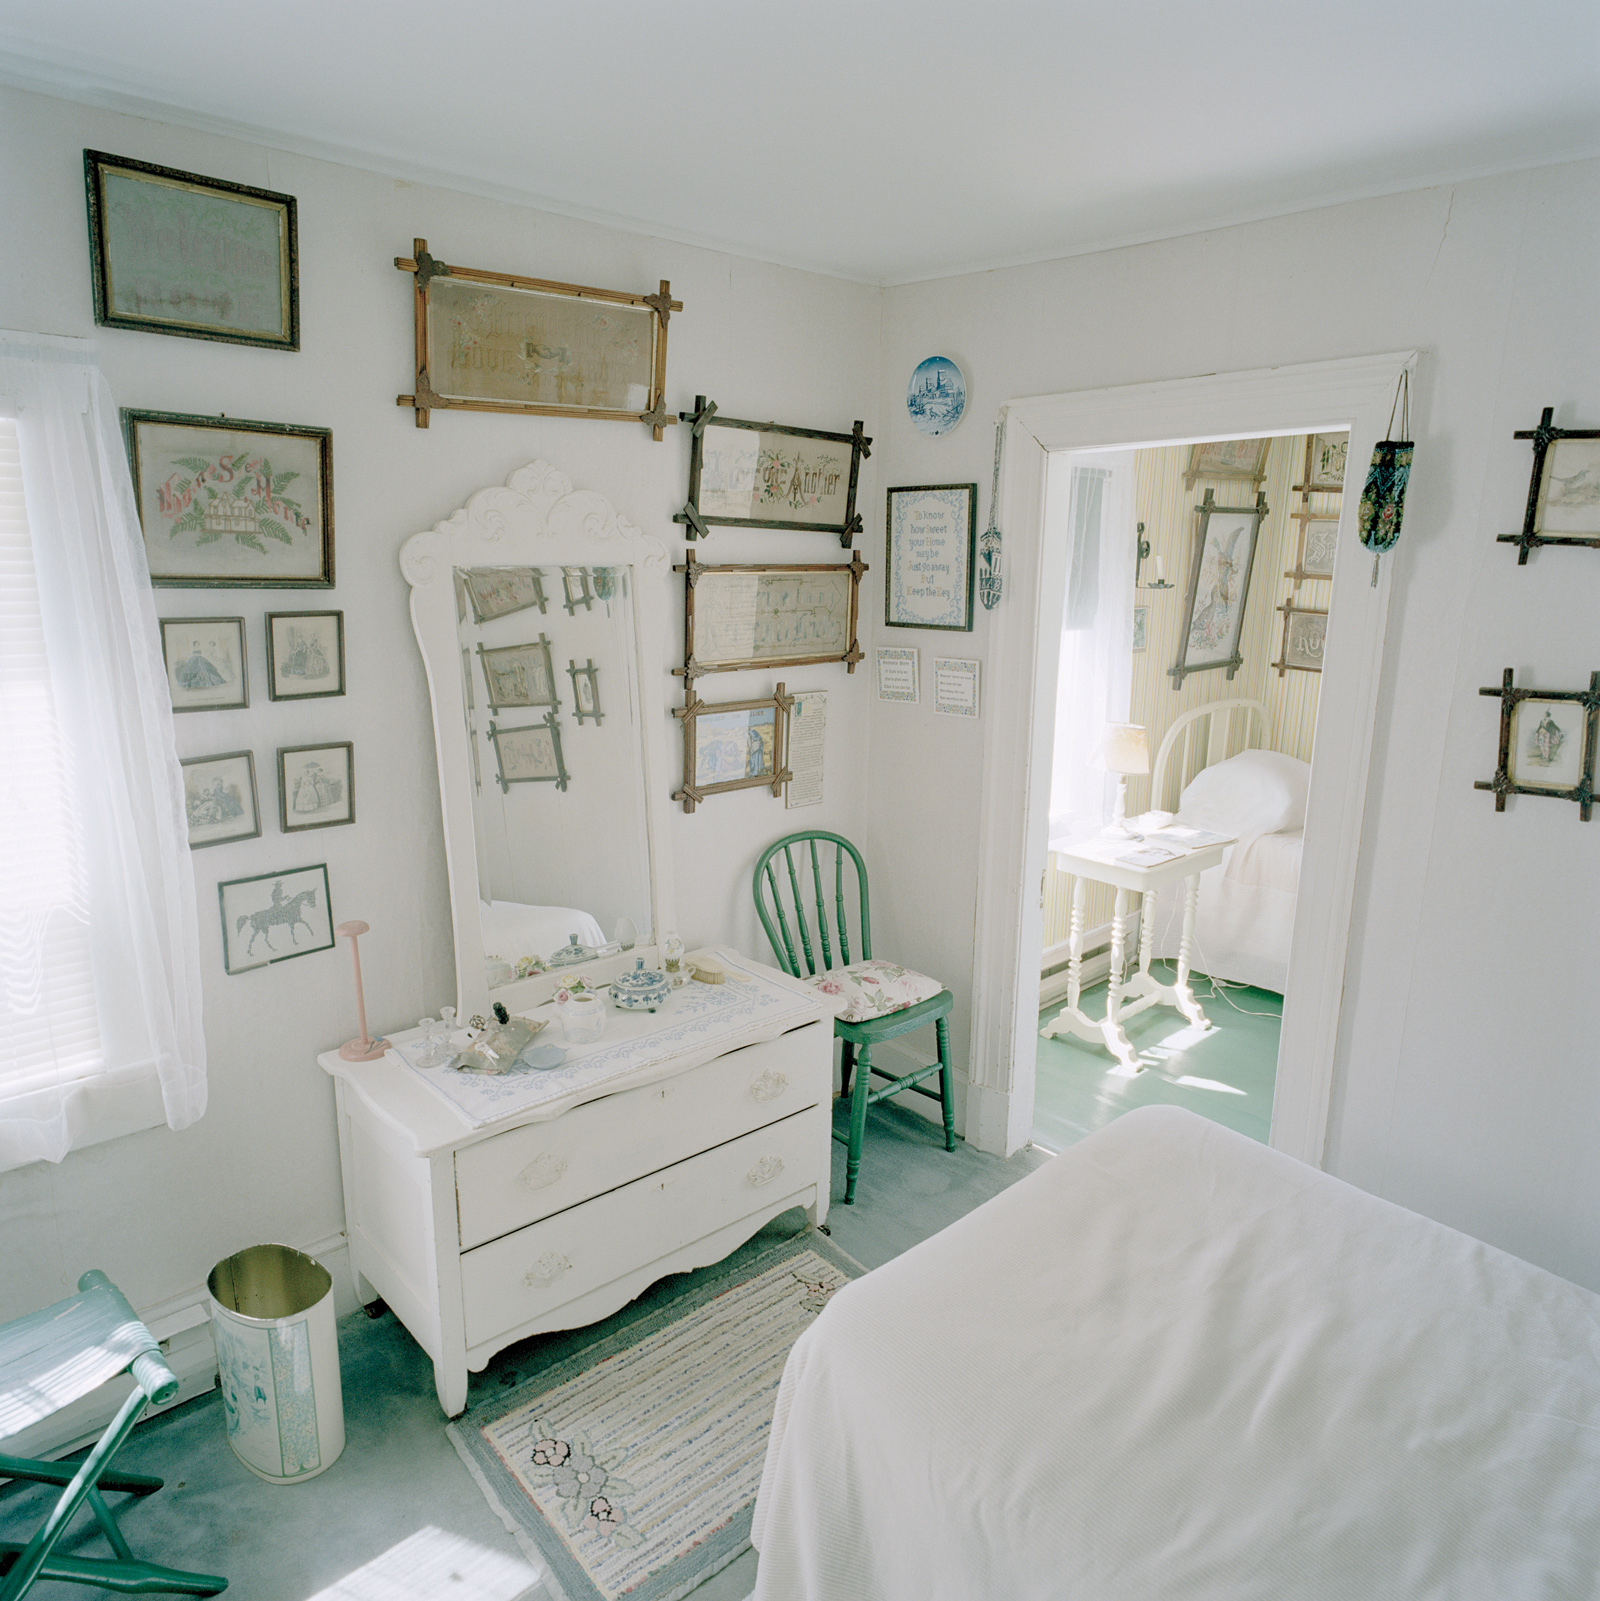     Katherine Knight, Bedroom, from the Caribou Mottos Series, 2006.

